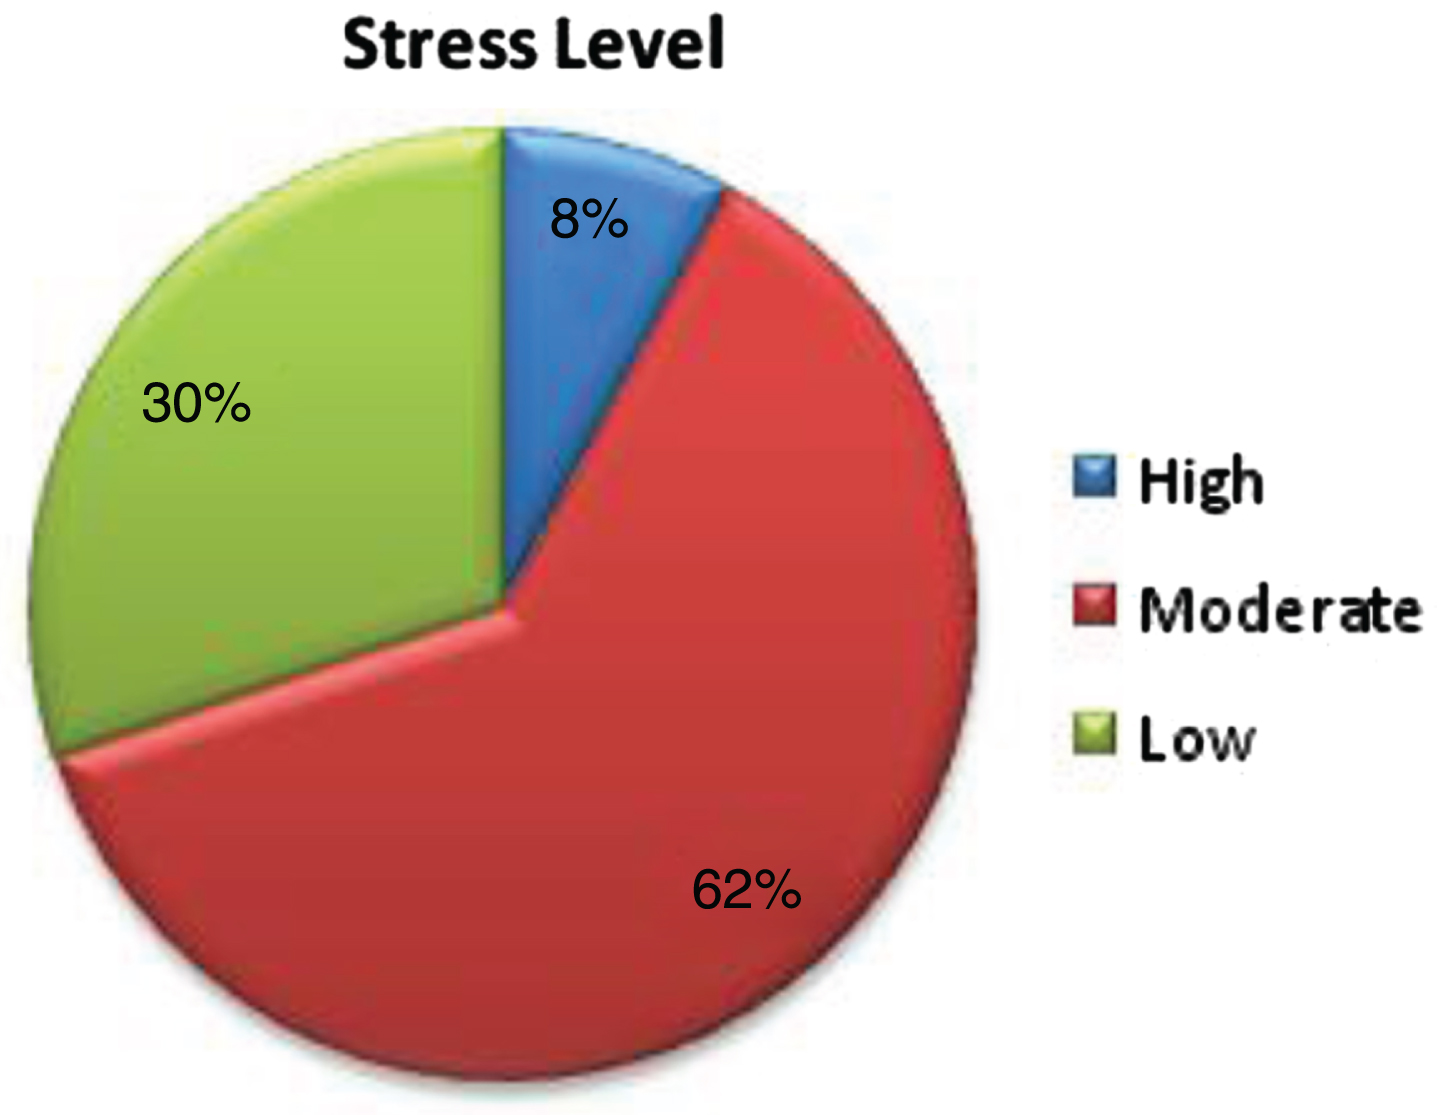 Stress level among the participants.